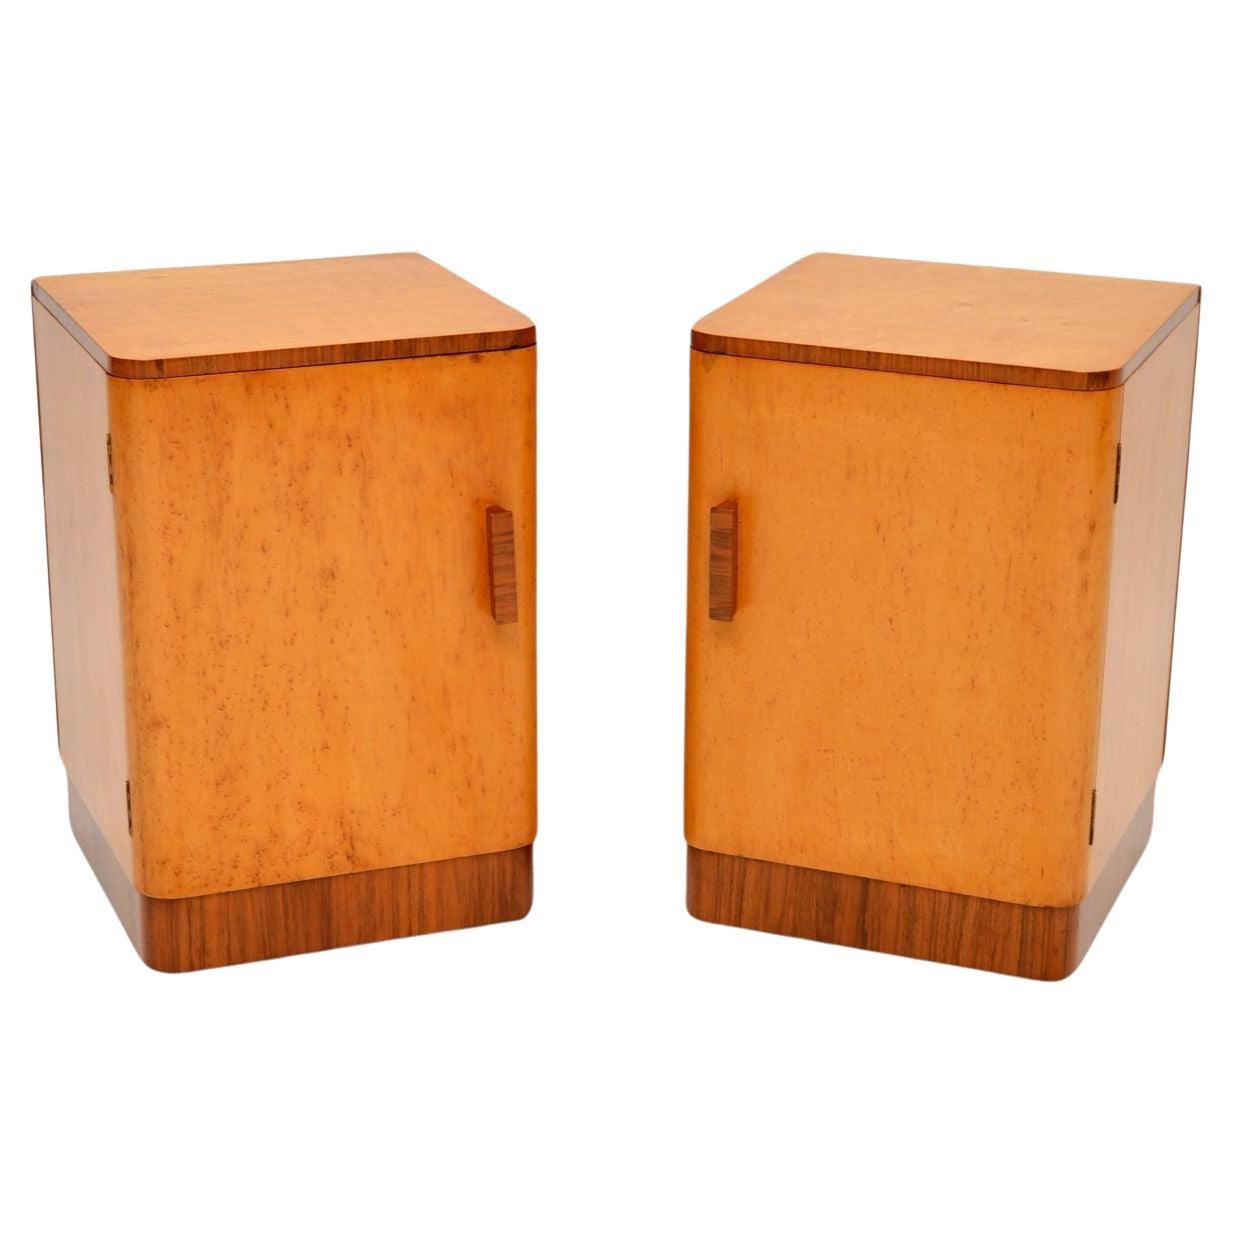 Pair of Art Deco Bedside Cabinets in Birds Eye Maple and Walnut